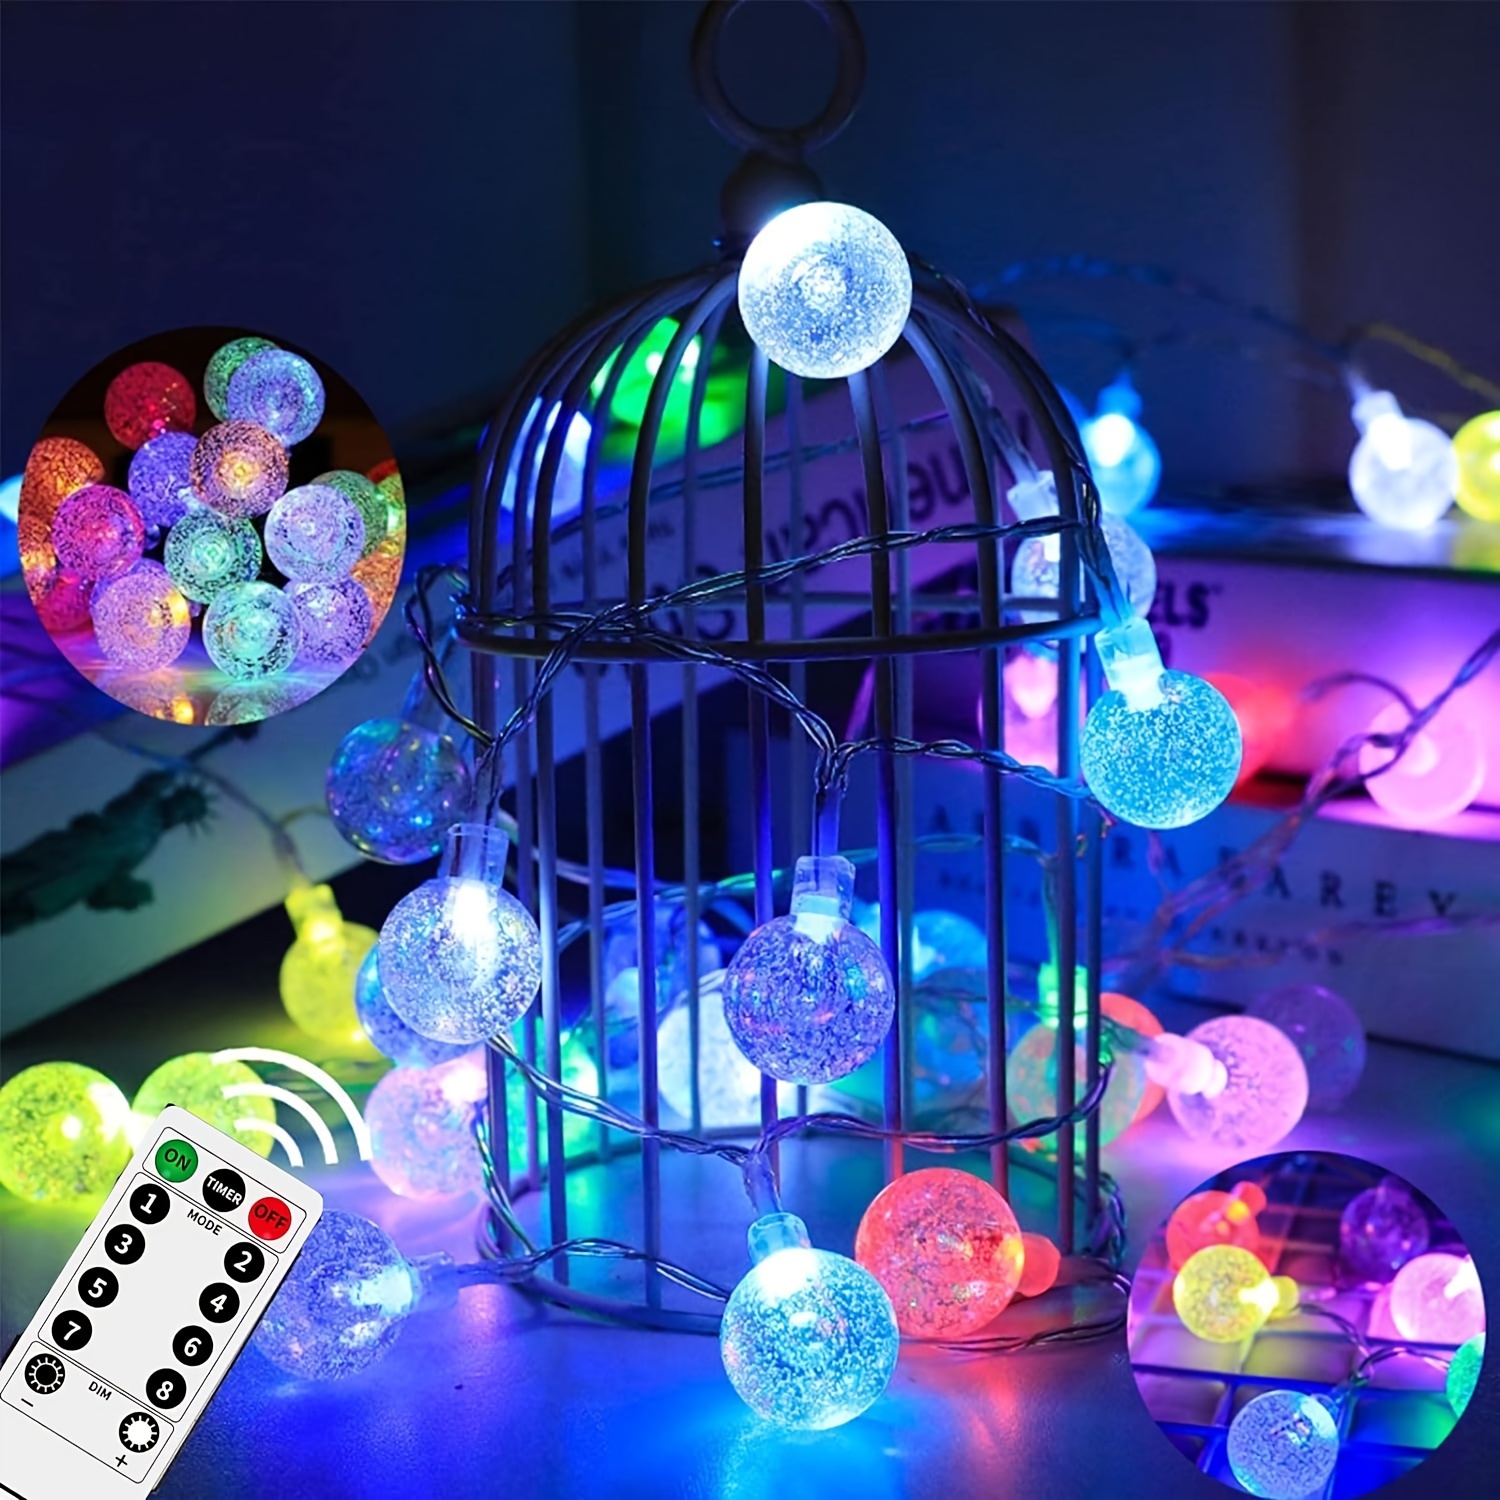 

Battery Color Changing String Lights - 33ft 100 Led Battery Operated Colorful Fairy Lights With Remote, 8 Modes, Rgb Globe String Lights Outdoor Waterproof For Bedroom Christmas Indoor Decor